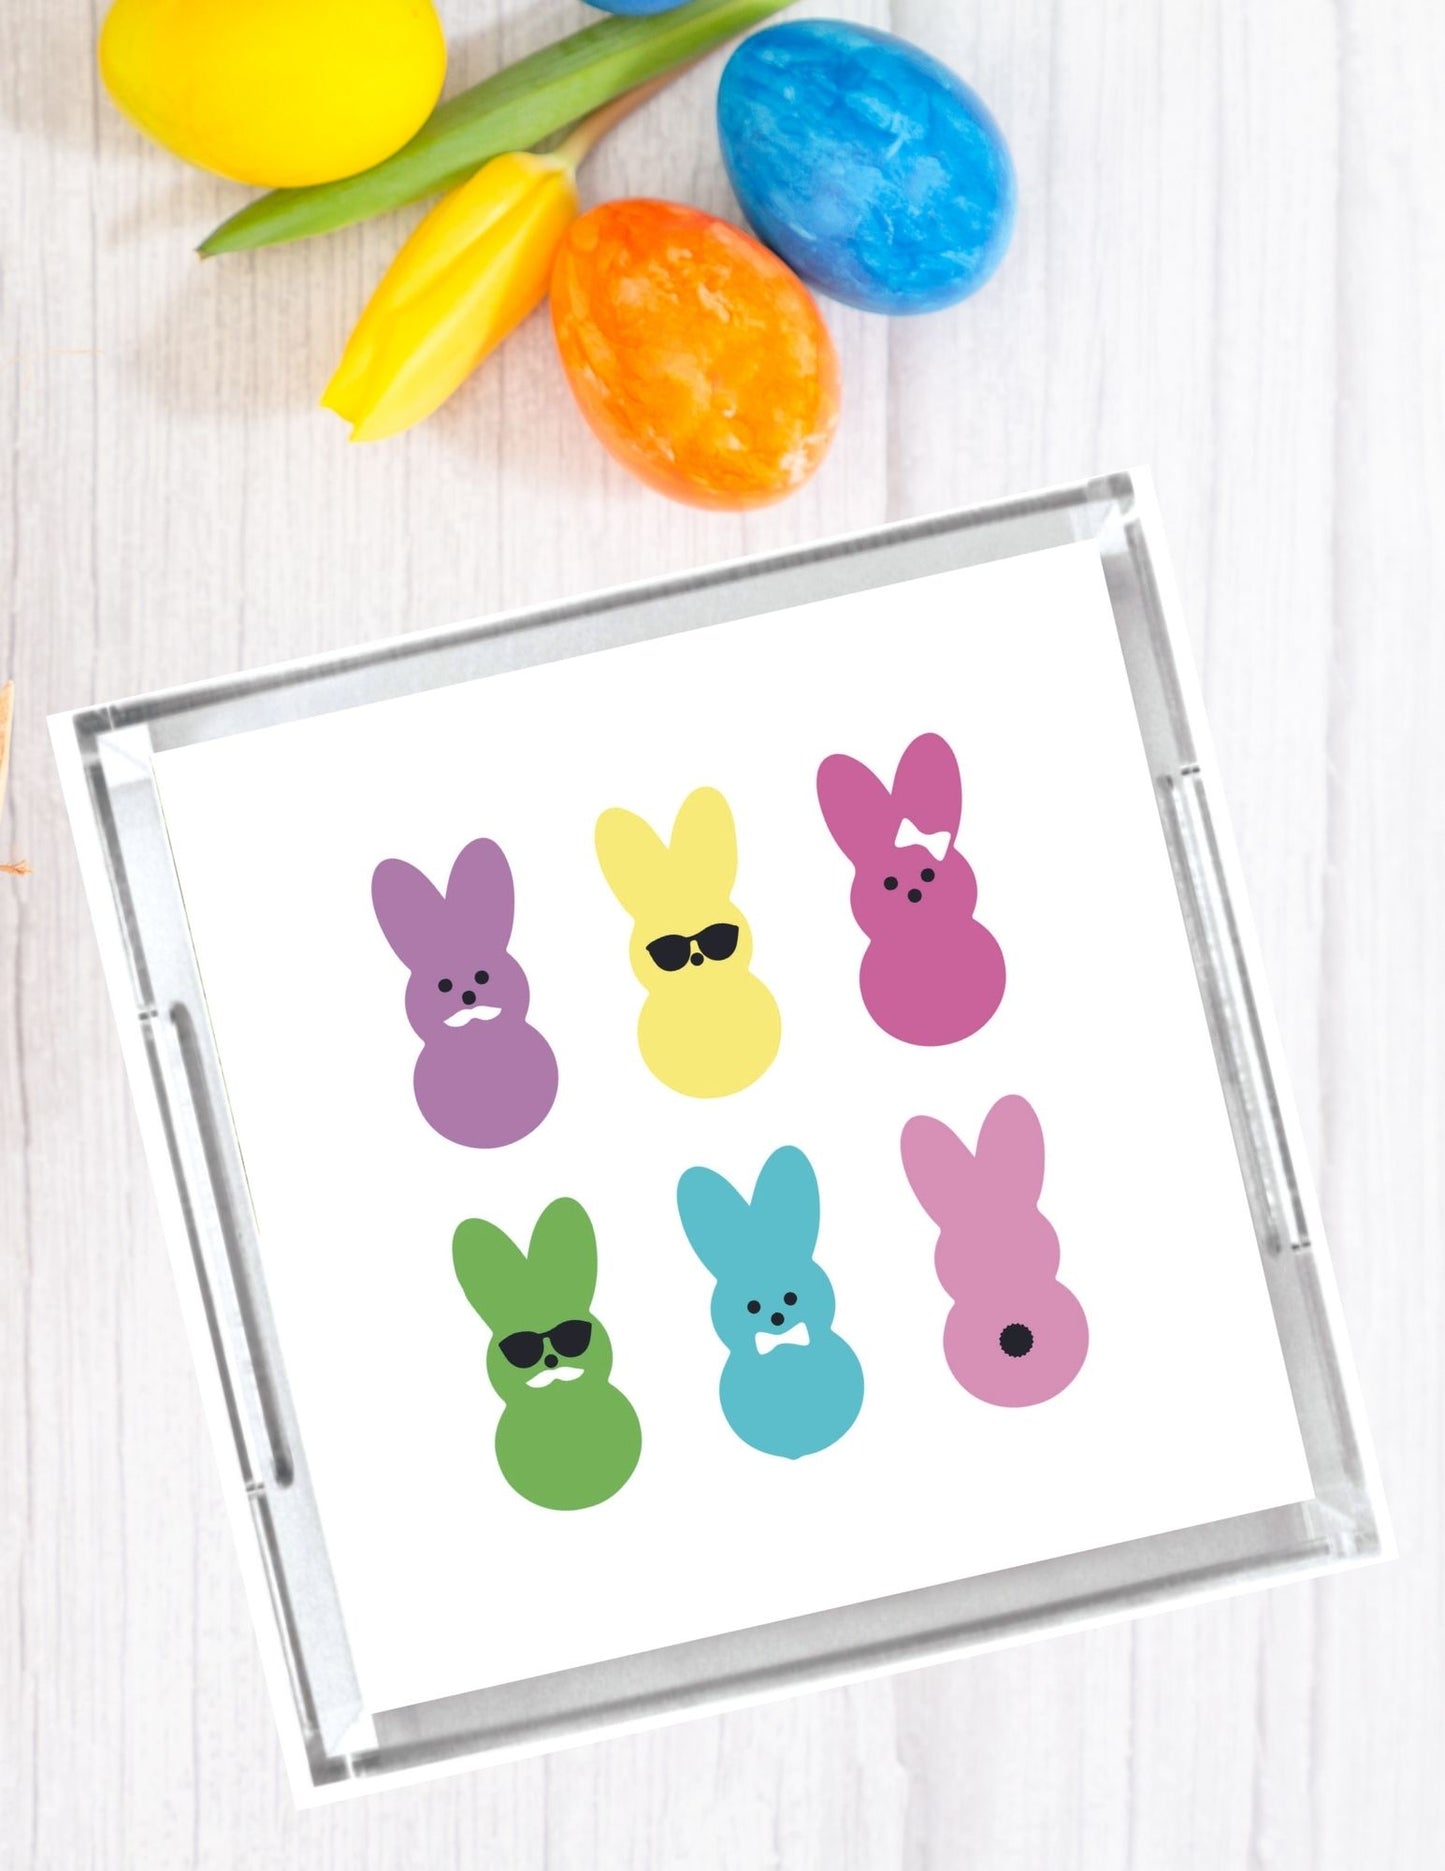 Acrylic Serving Tray - Easter Cool Bunny Colorful Tray - Peeps